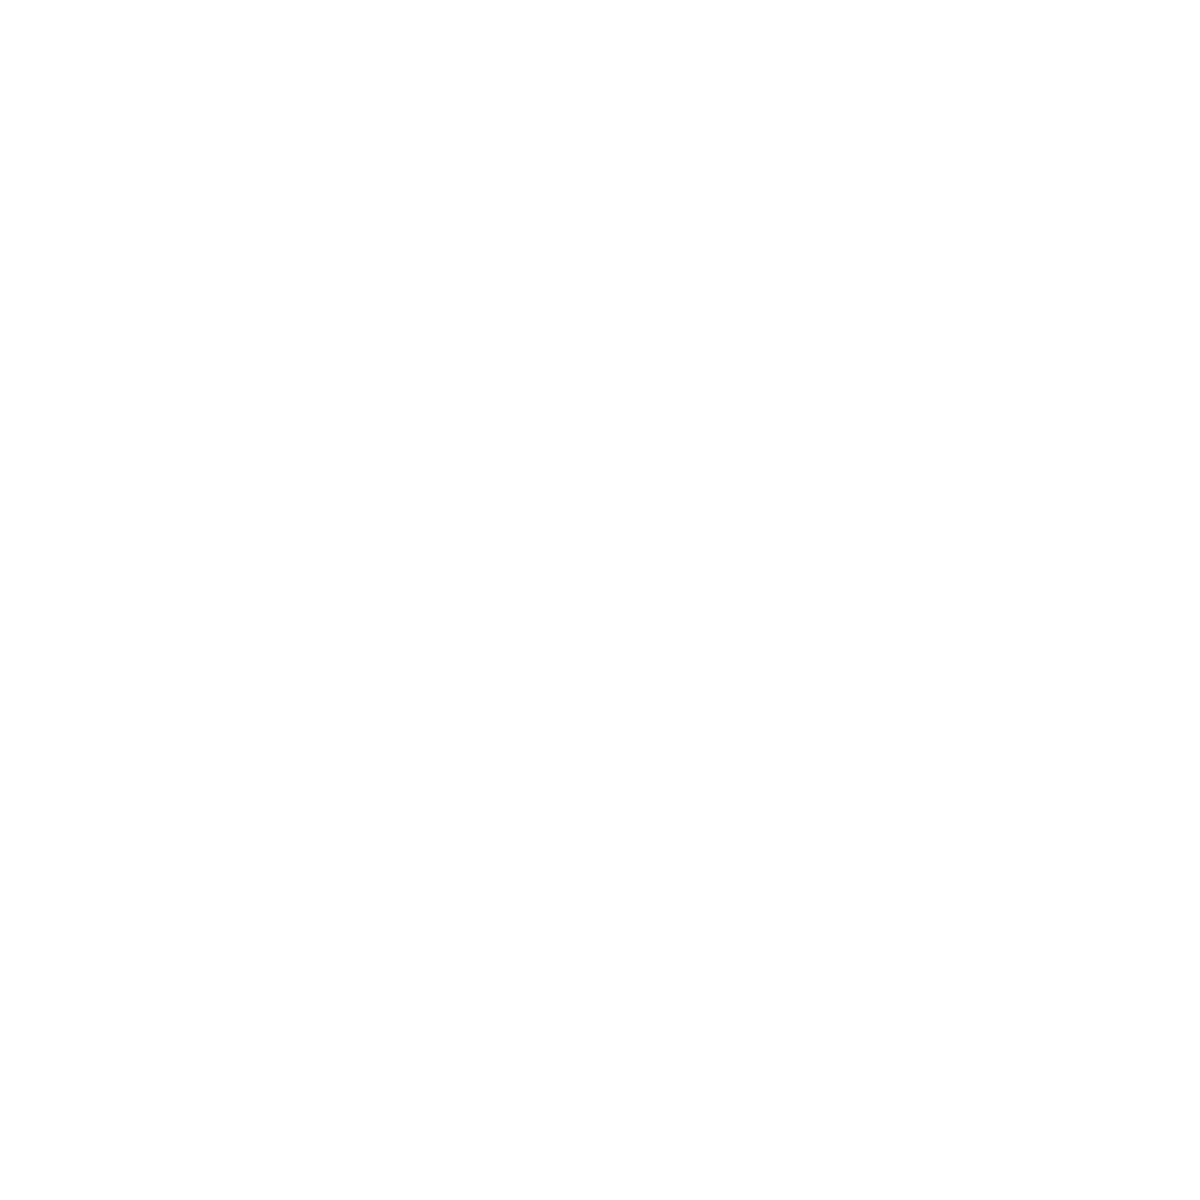 Peggy Witzel Bookkeeping